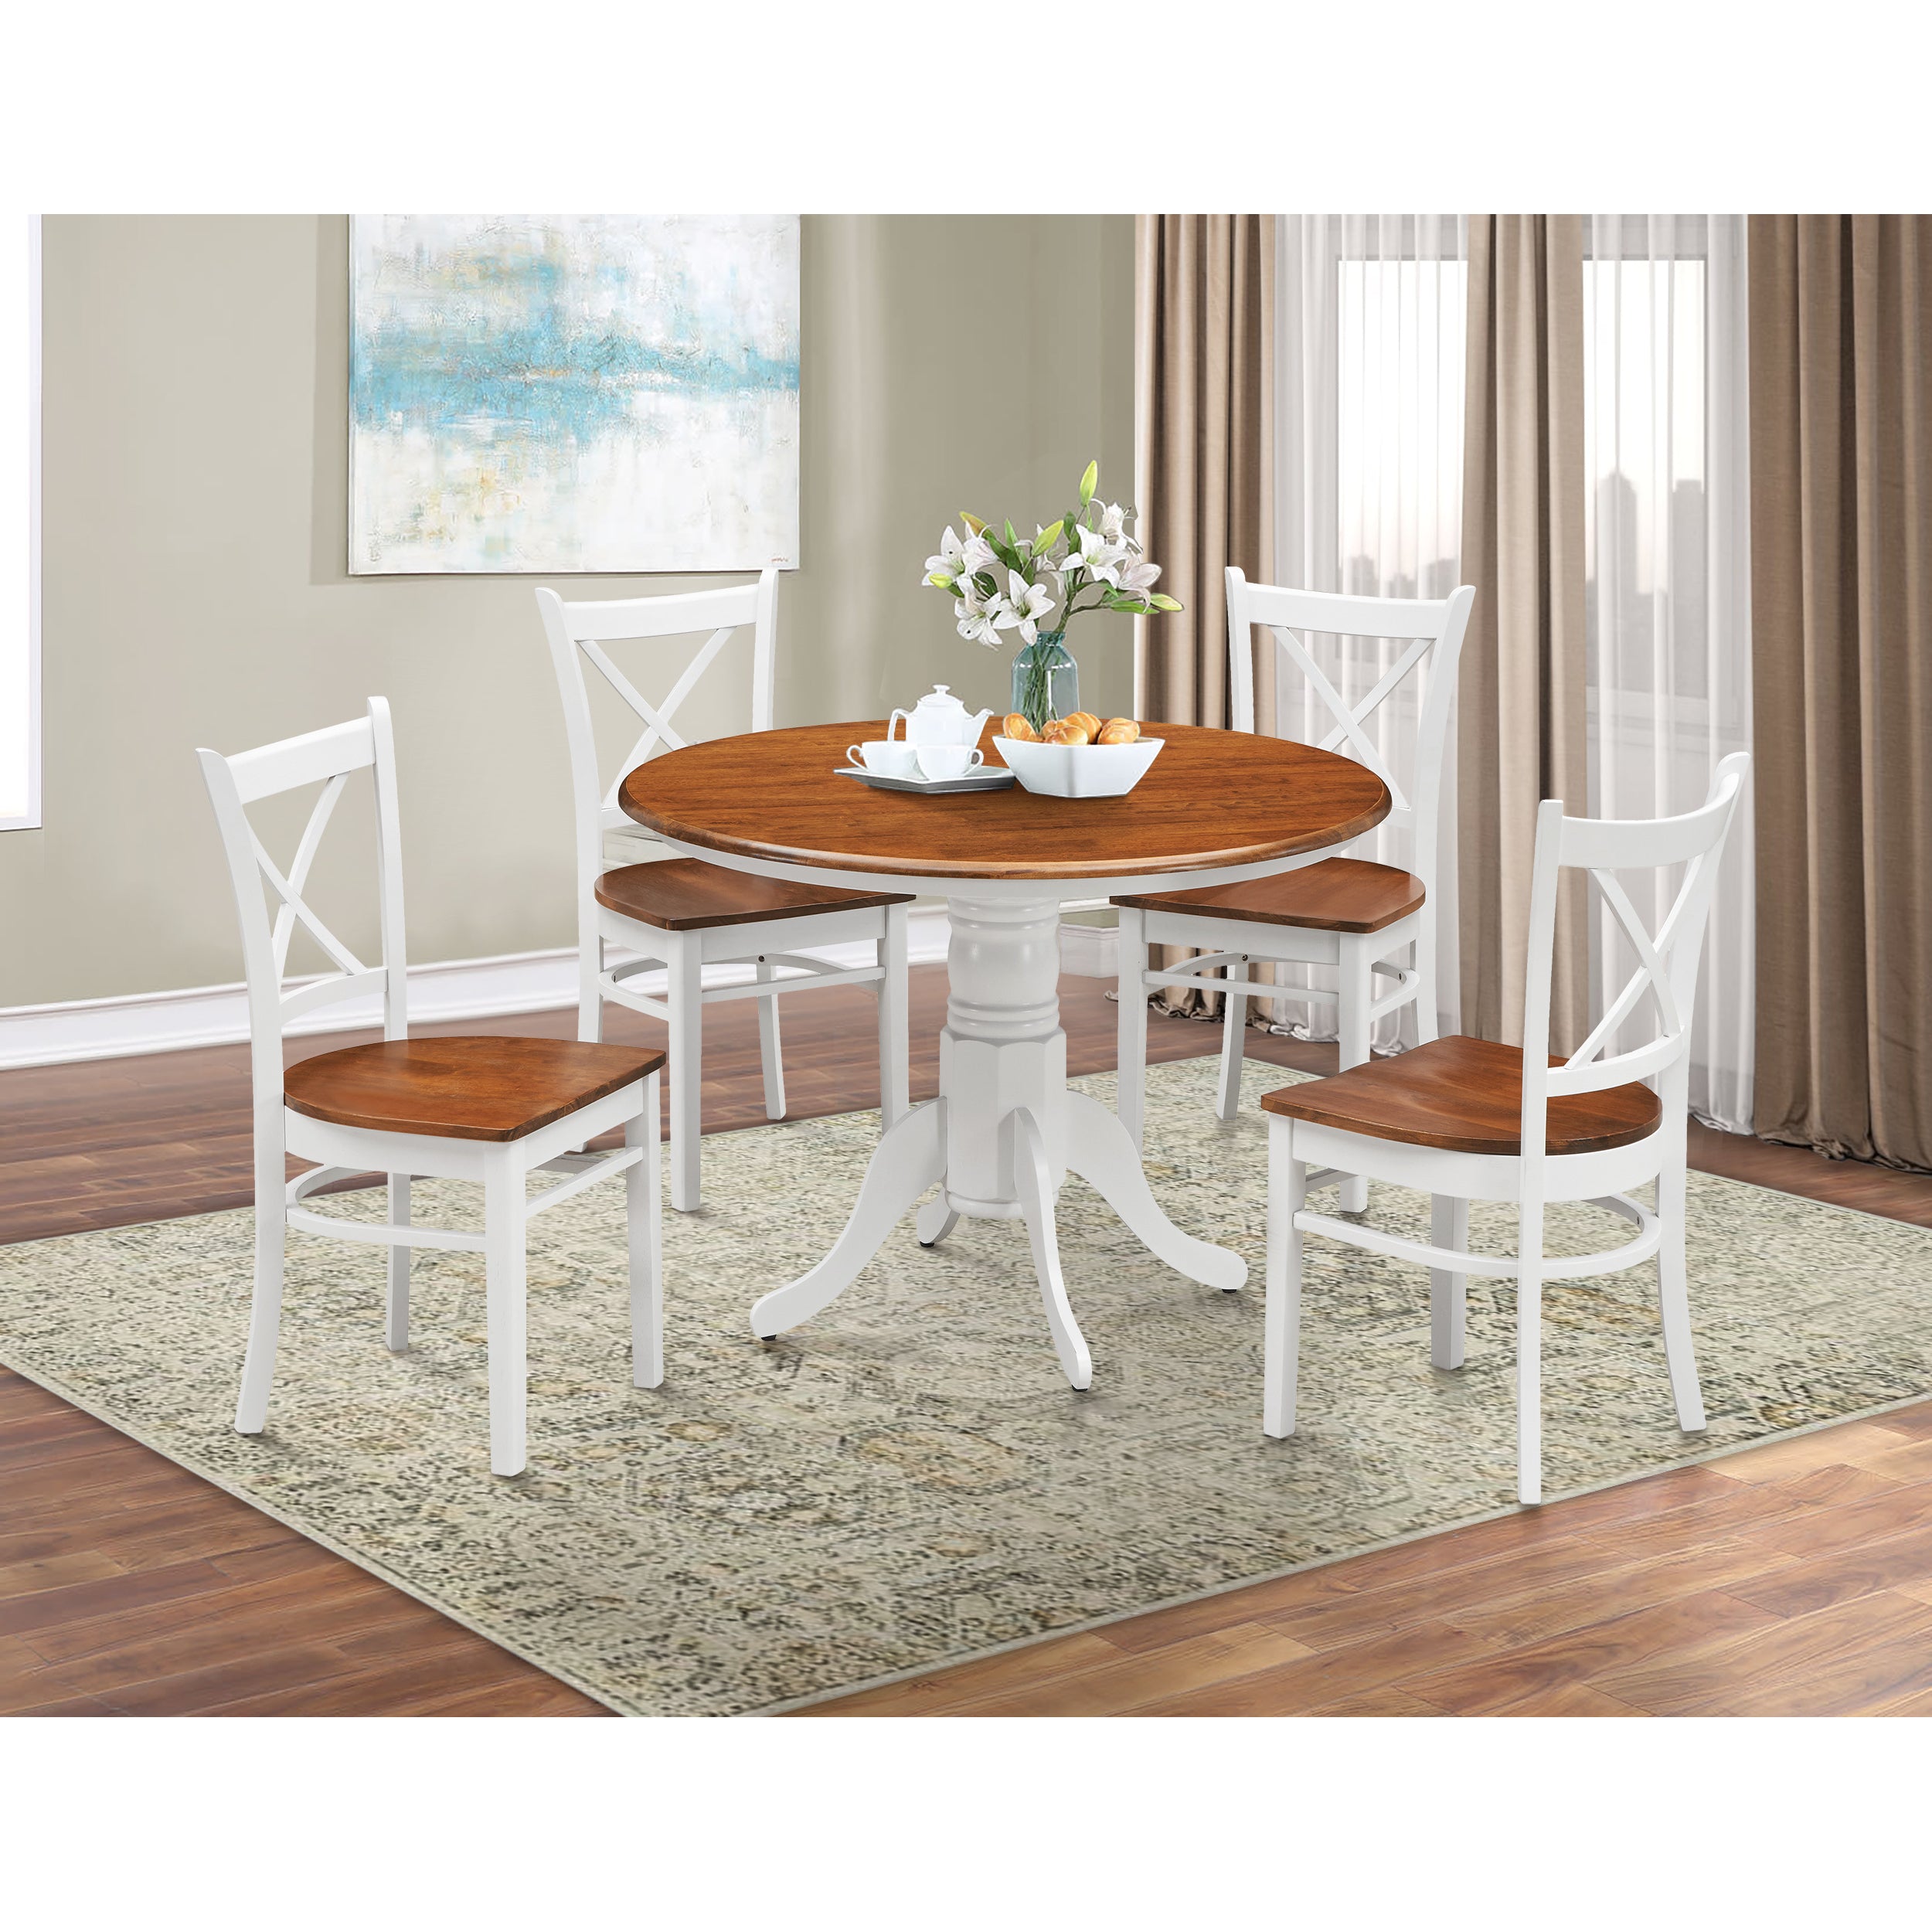 Lupin Round Dining Table 106cm Pedestral Stand Solid Rubber Wood - White Oak